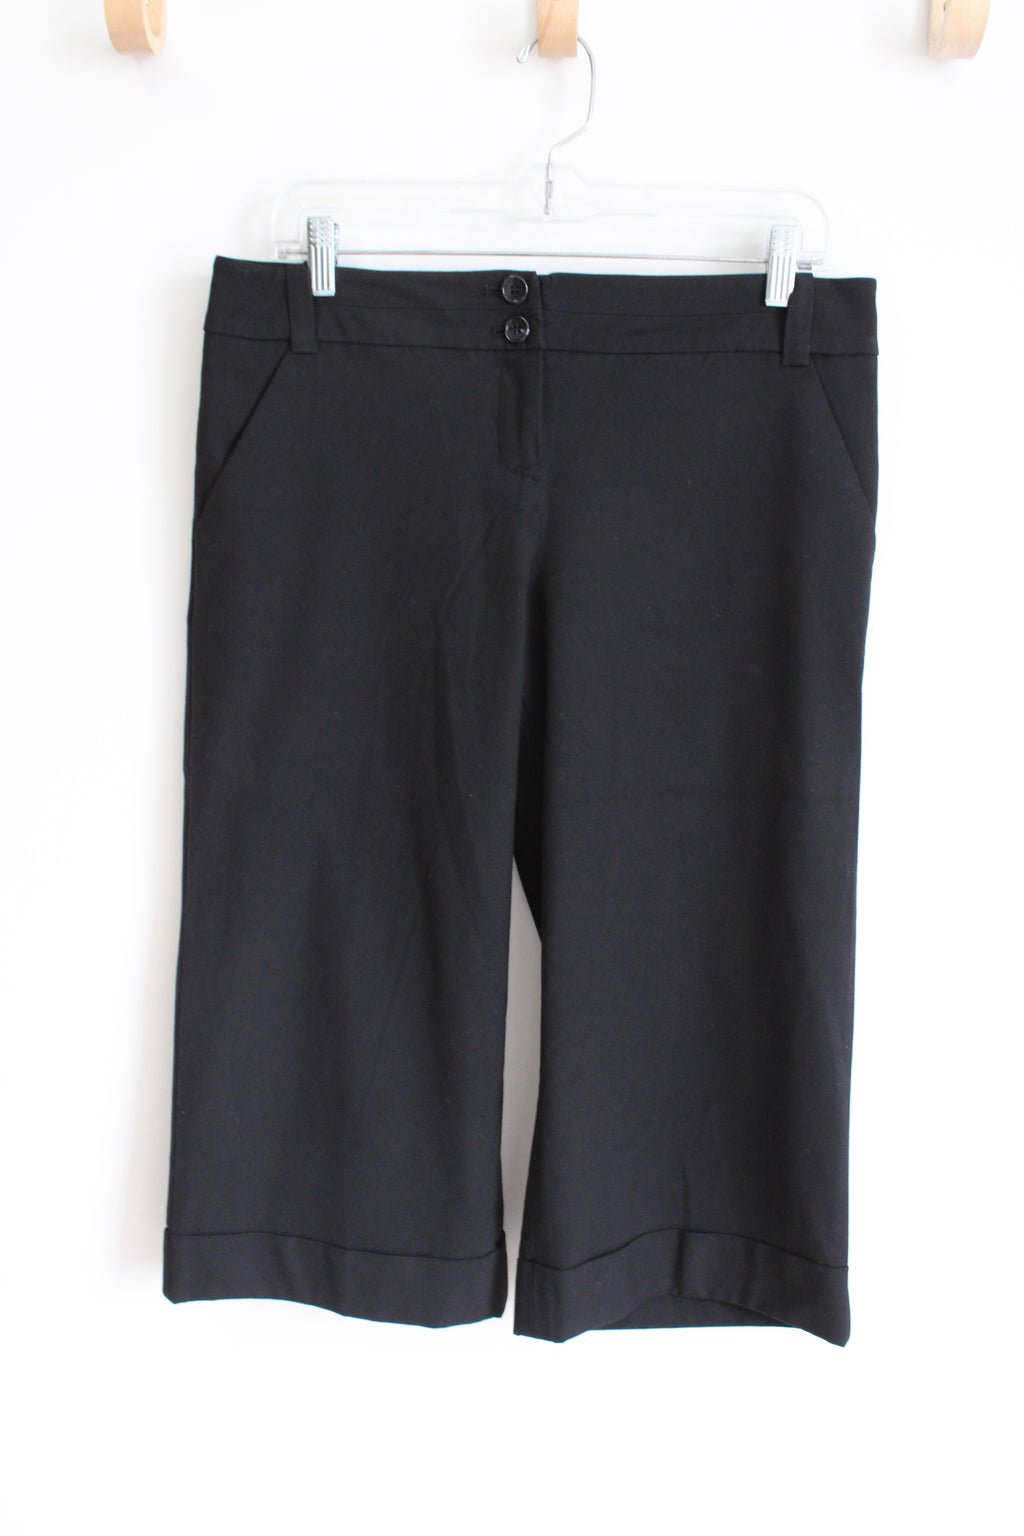 The Limited Cassidy Fit Black Capri Pant | 6